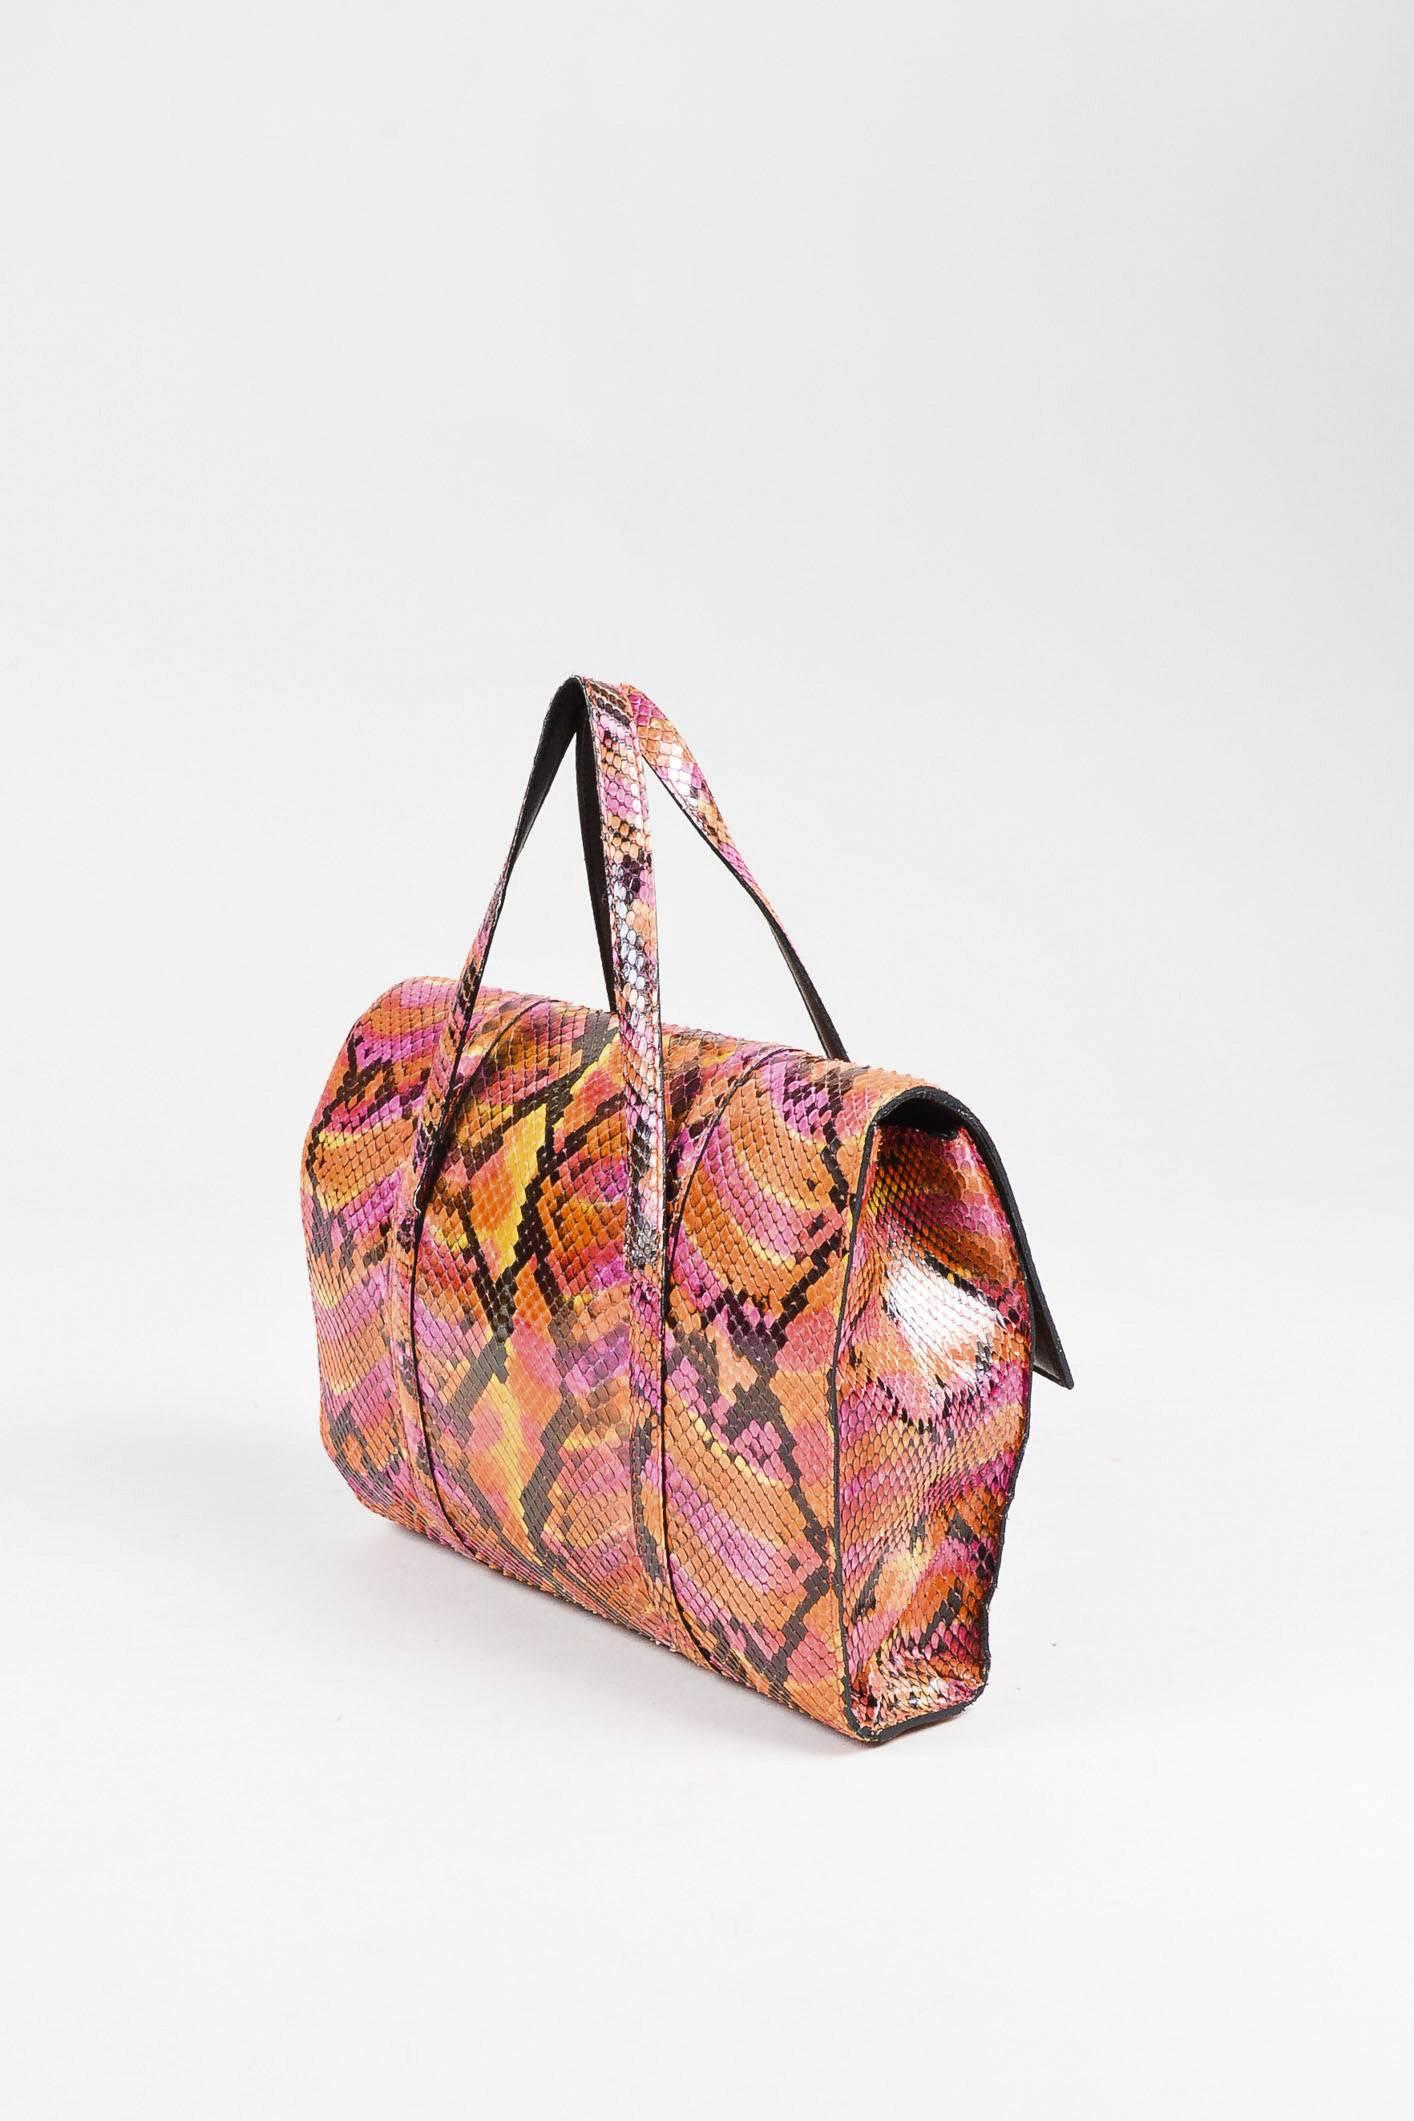 This bag may be small, but packs a bold punch. Luxurious python snakeskin construction. Unique multicolored pattern. Clear plastic 'CC' logo applique at front. Top flat handles. Front flap with hidden magnetic closure. Open interior. Comes with dust